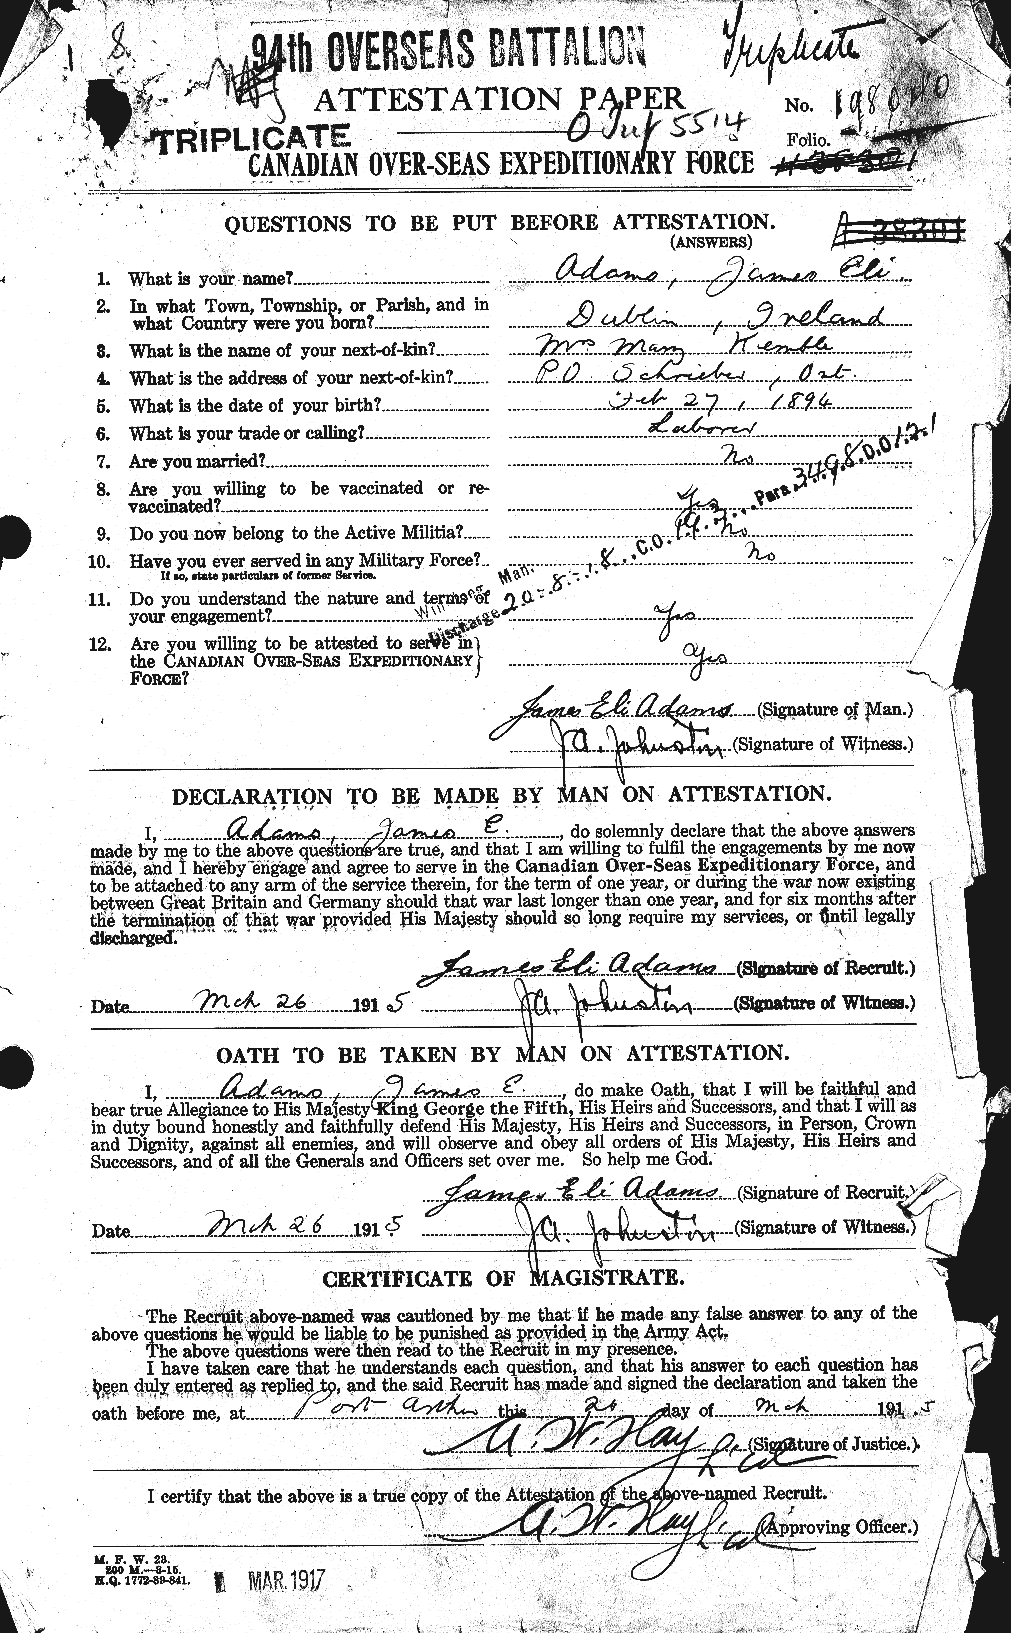 Personnel Records of the First World War - CEF 203256a